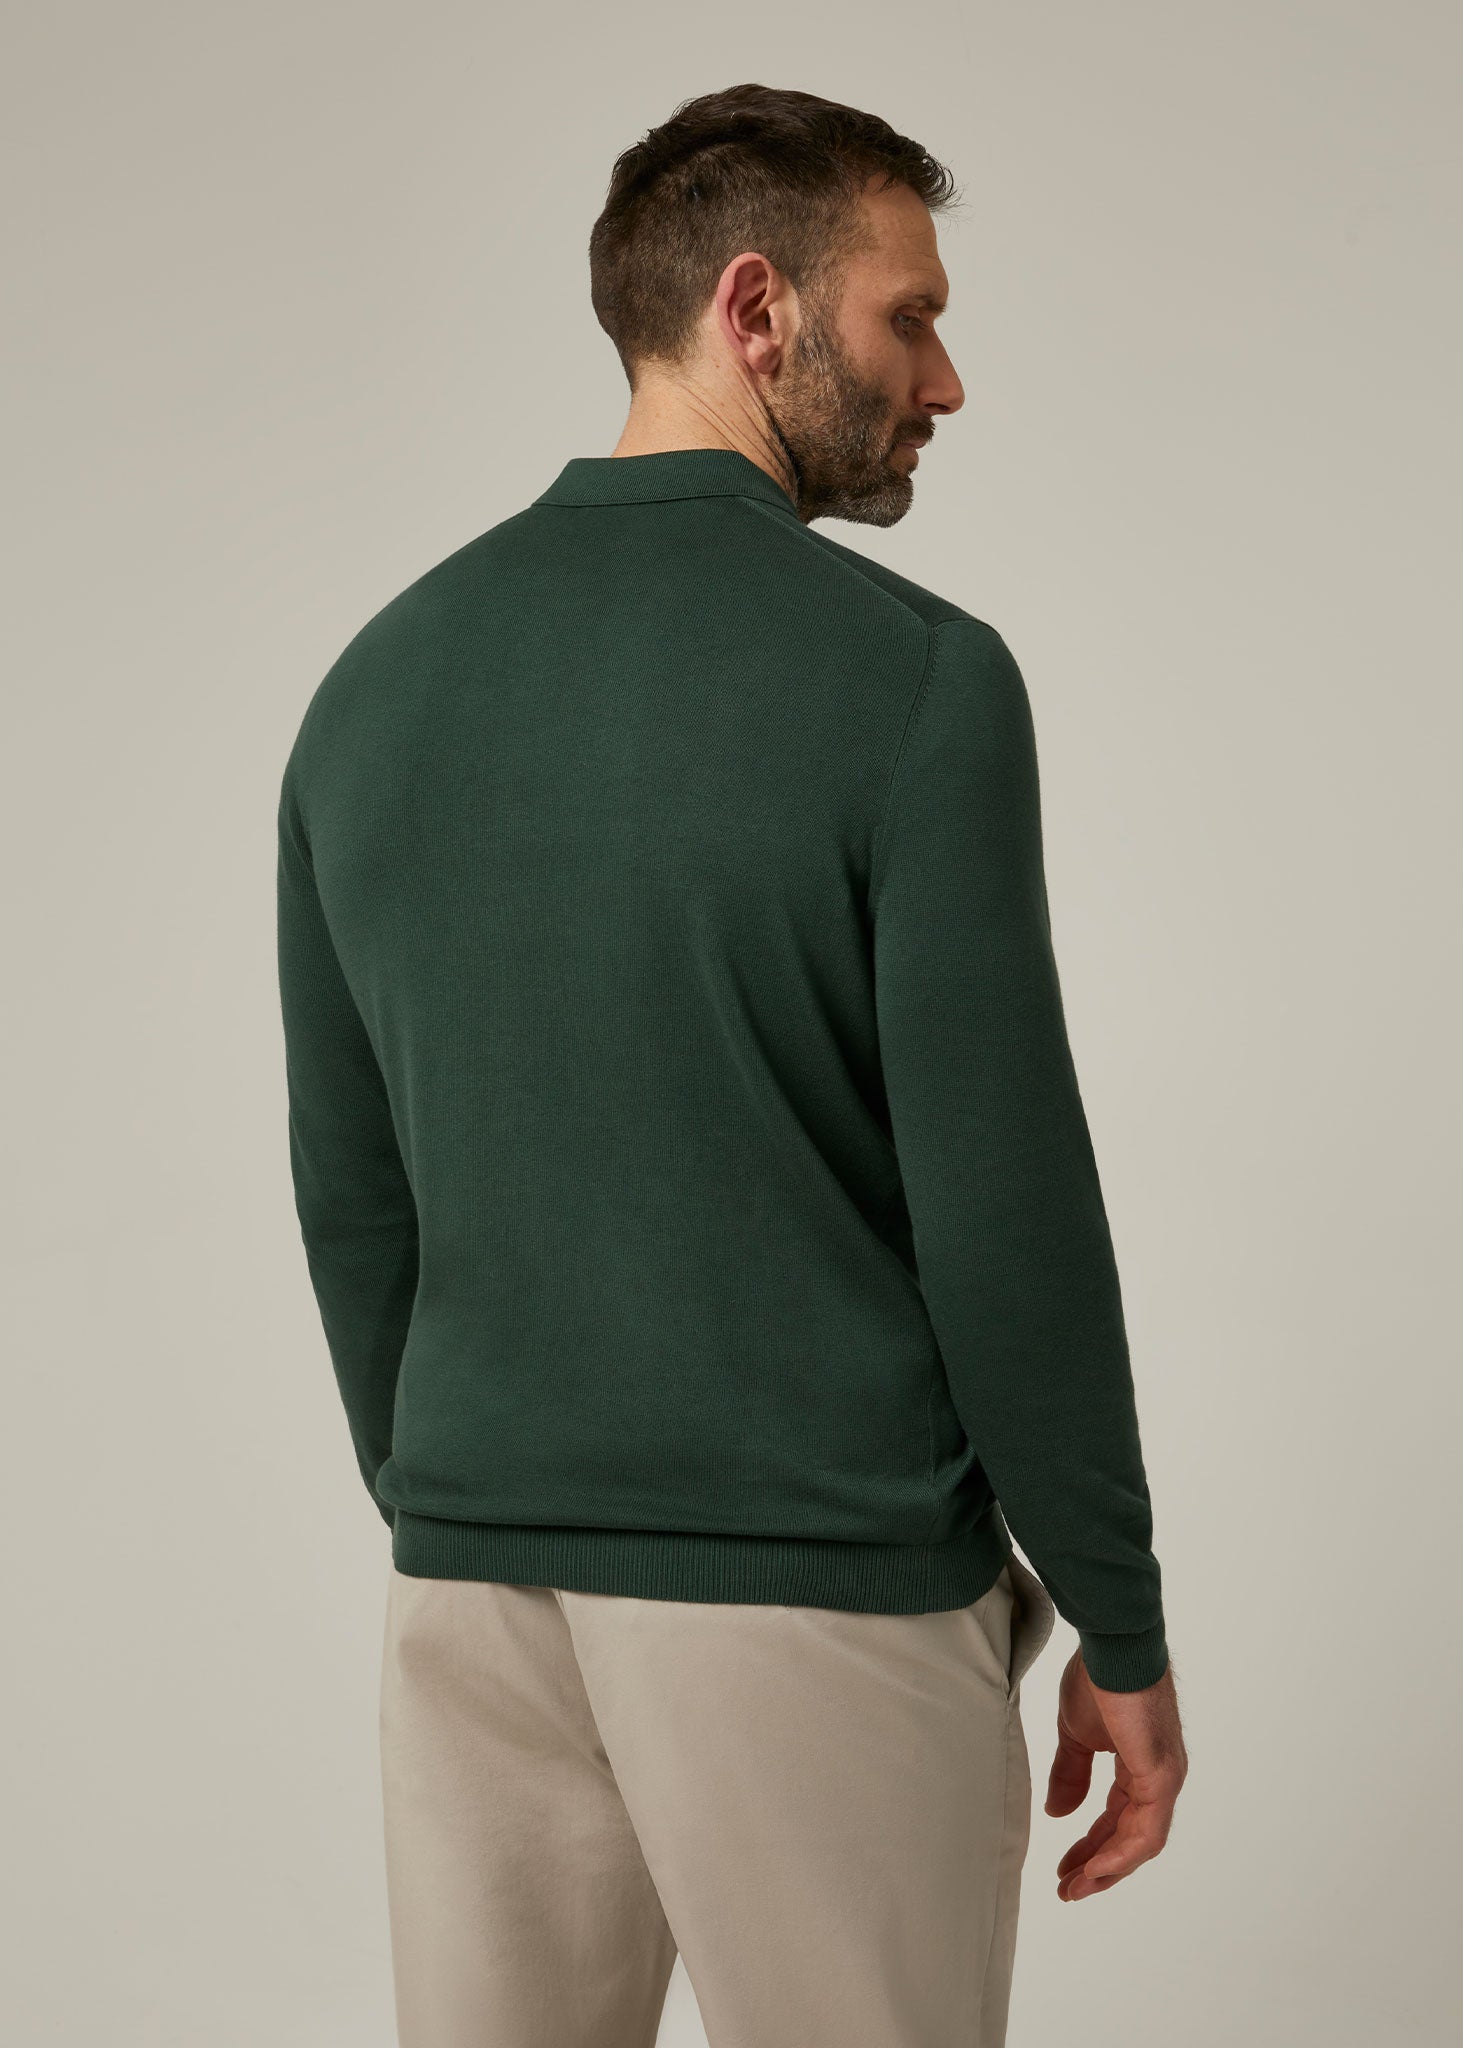 Emsworth Cotton Long Sleeve Polo Shirt in Racing Green